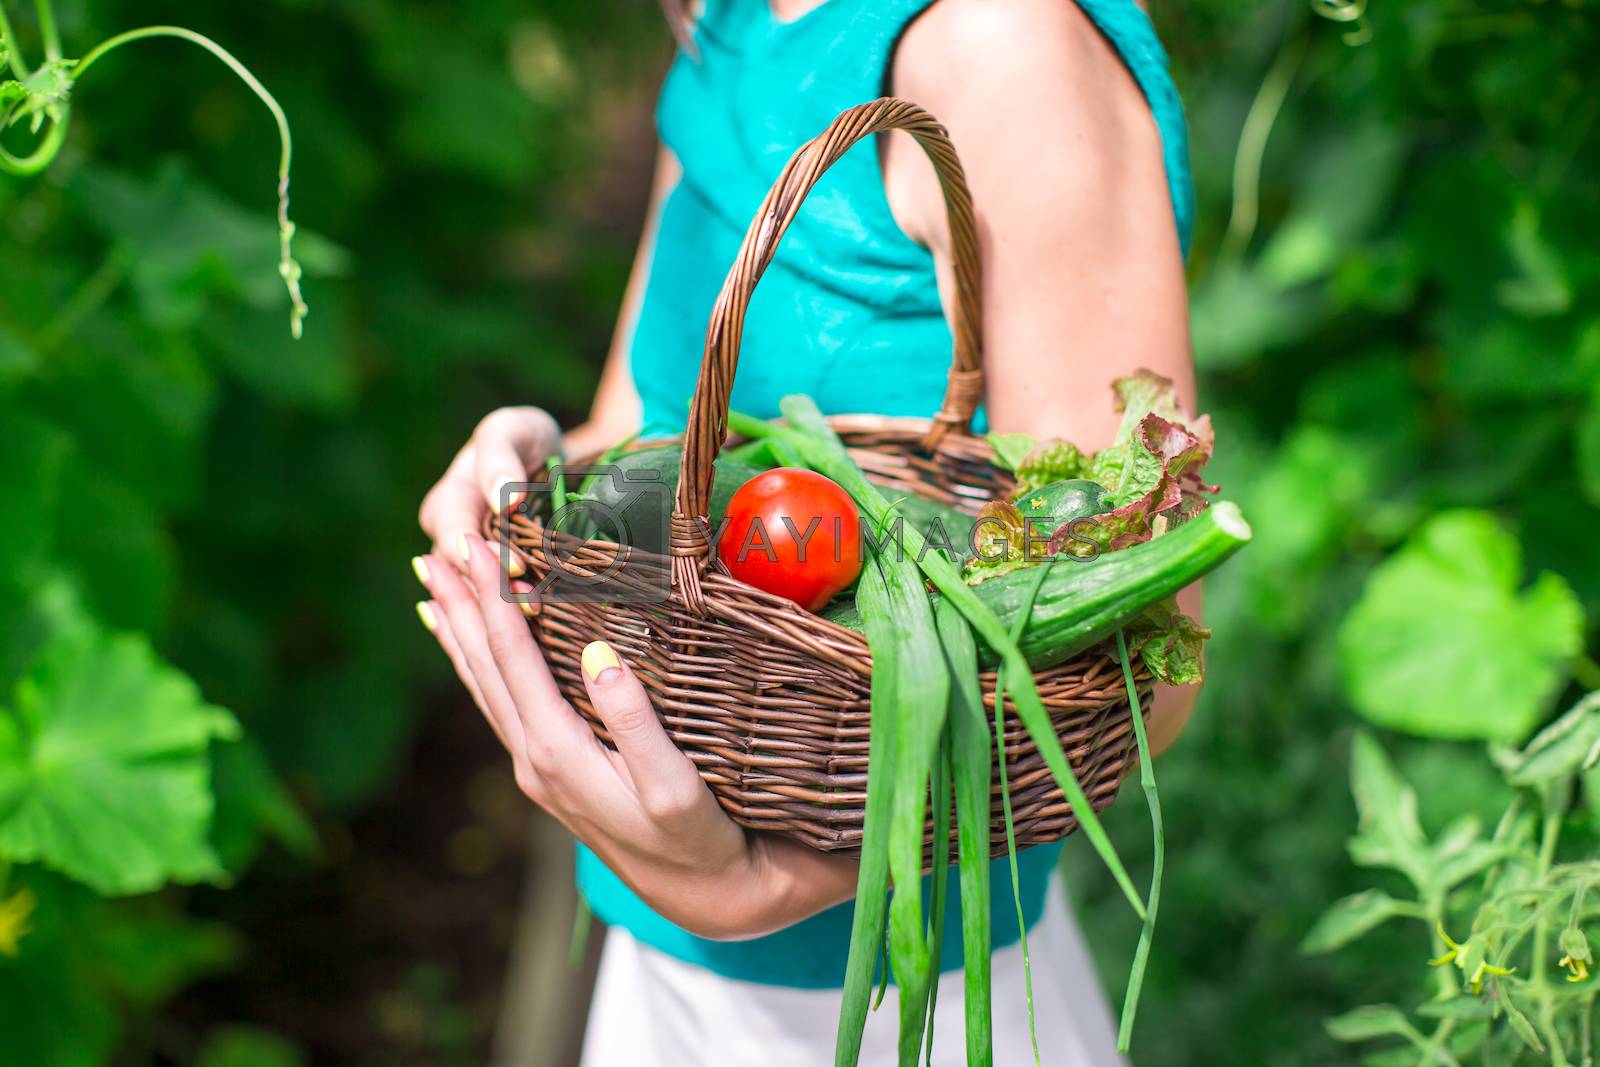 Royalty free image of Close-up basket of greens in woman's hands by travnikovstudio